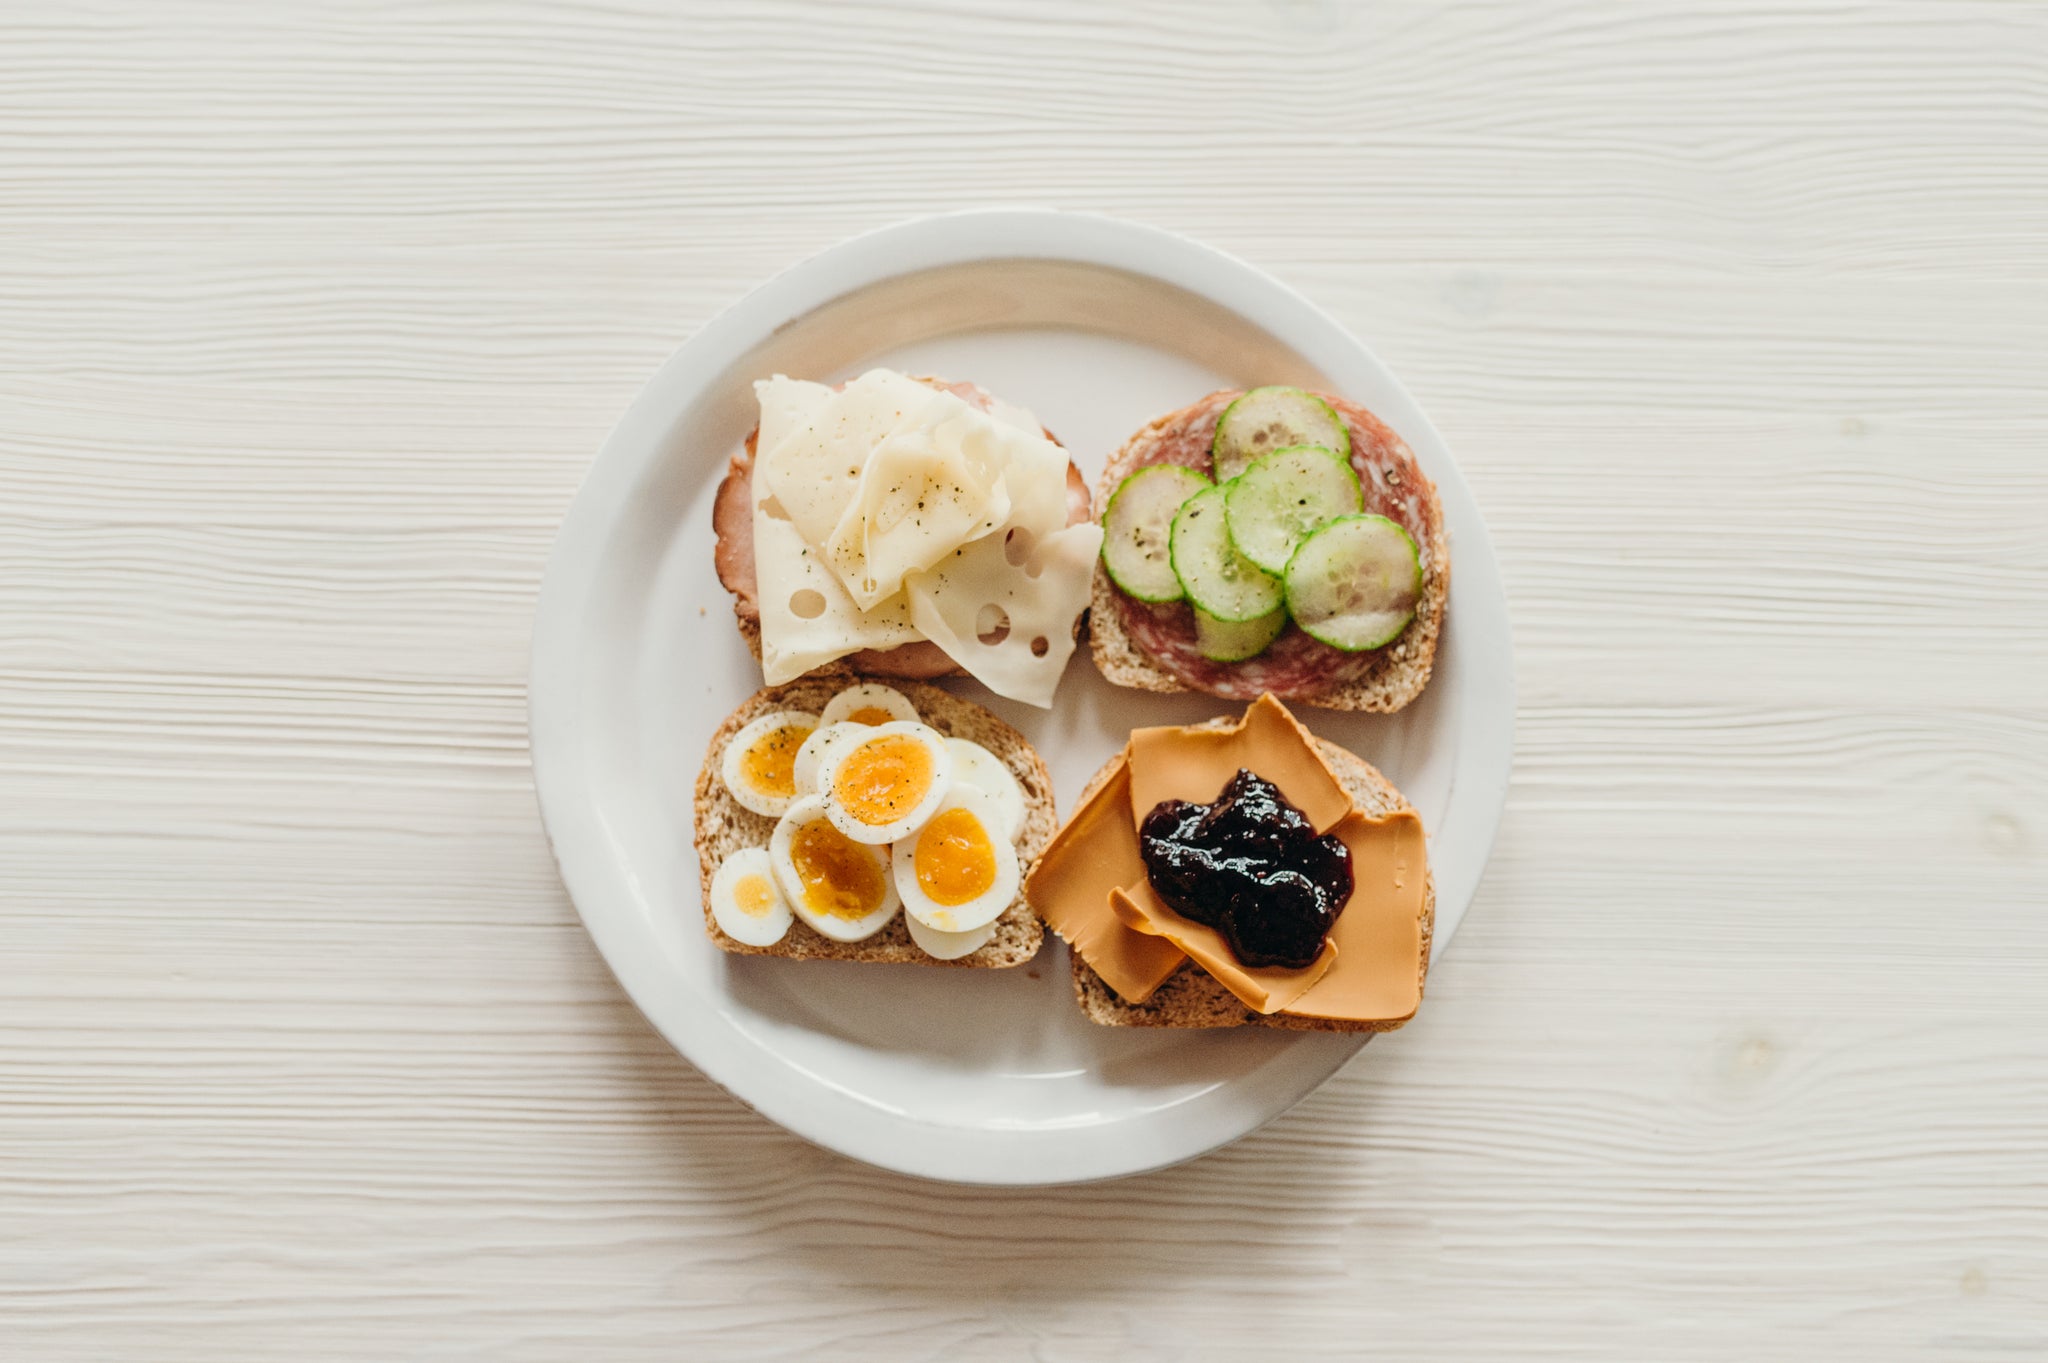 The art of the open-faced sandwich